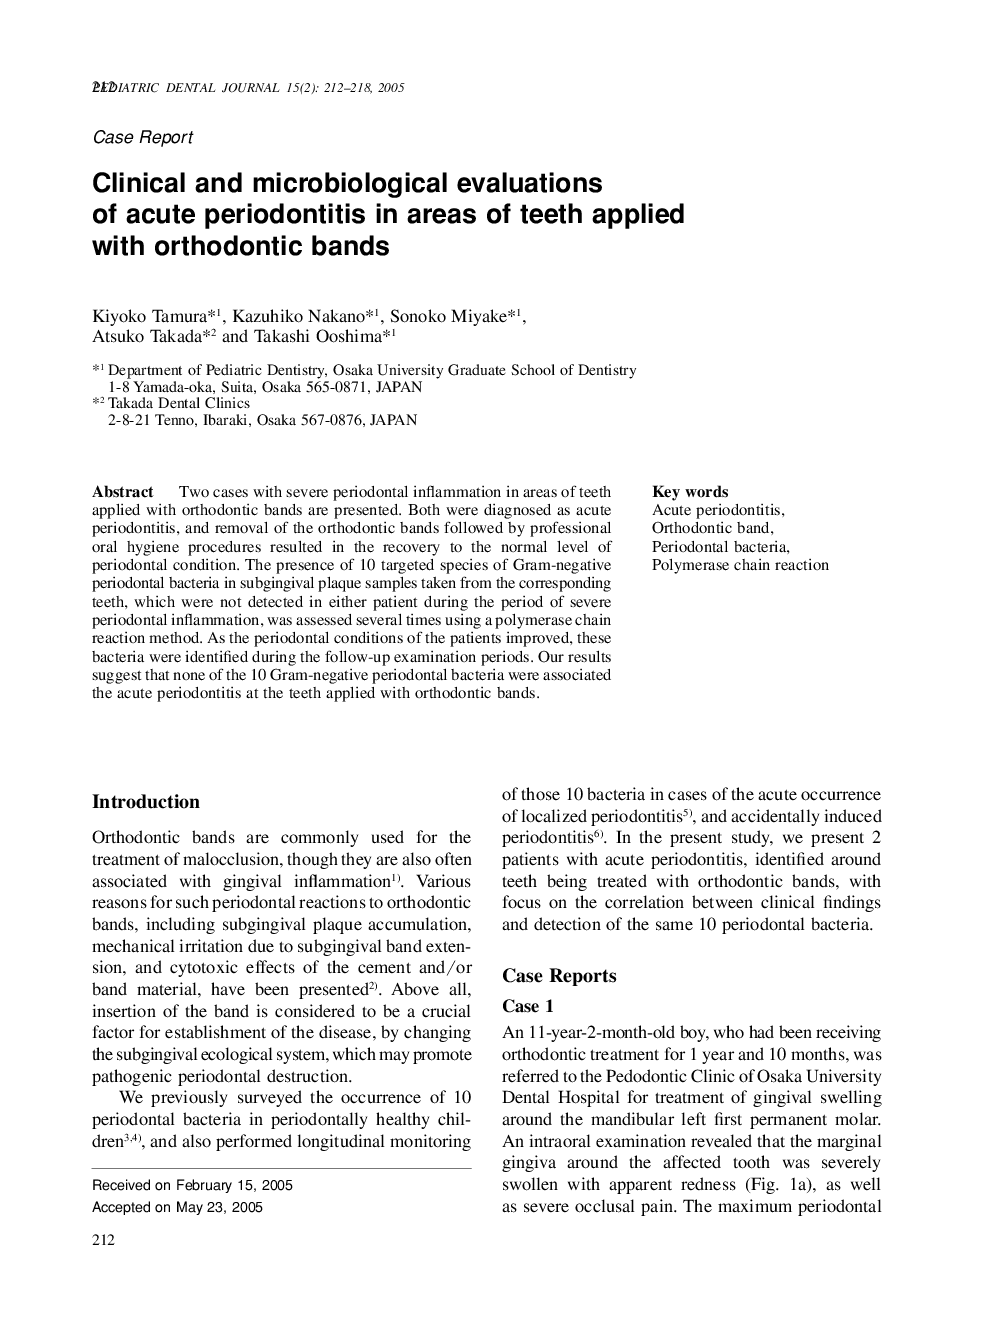 Clinical and microbiological evaluations of acute periodontitis in areas of teeth applied with orthodontic bands